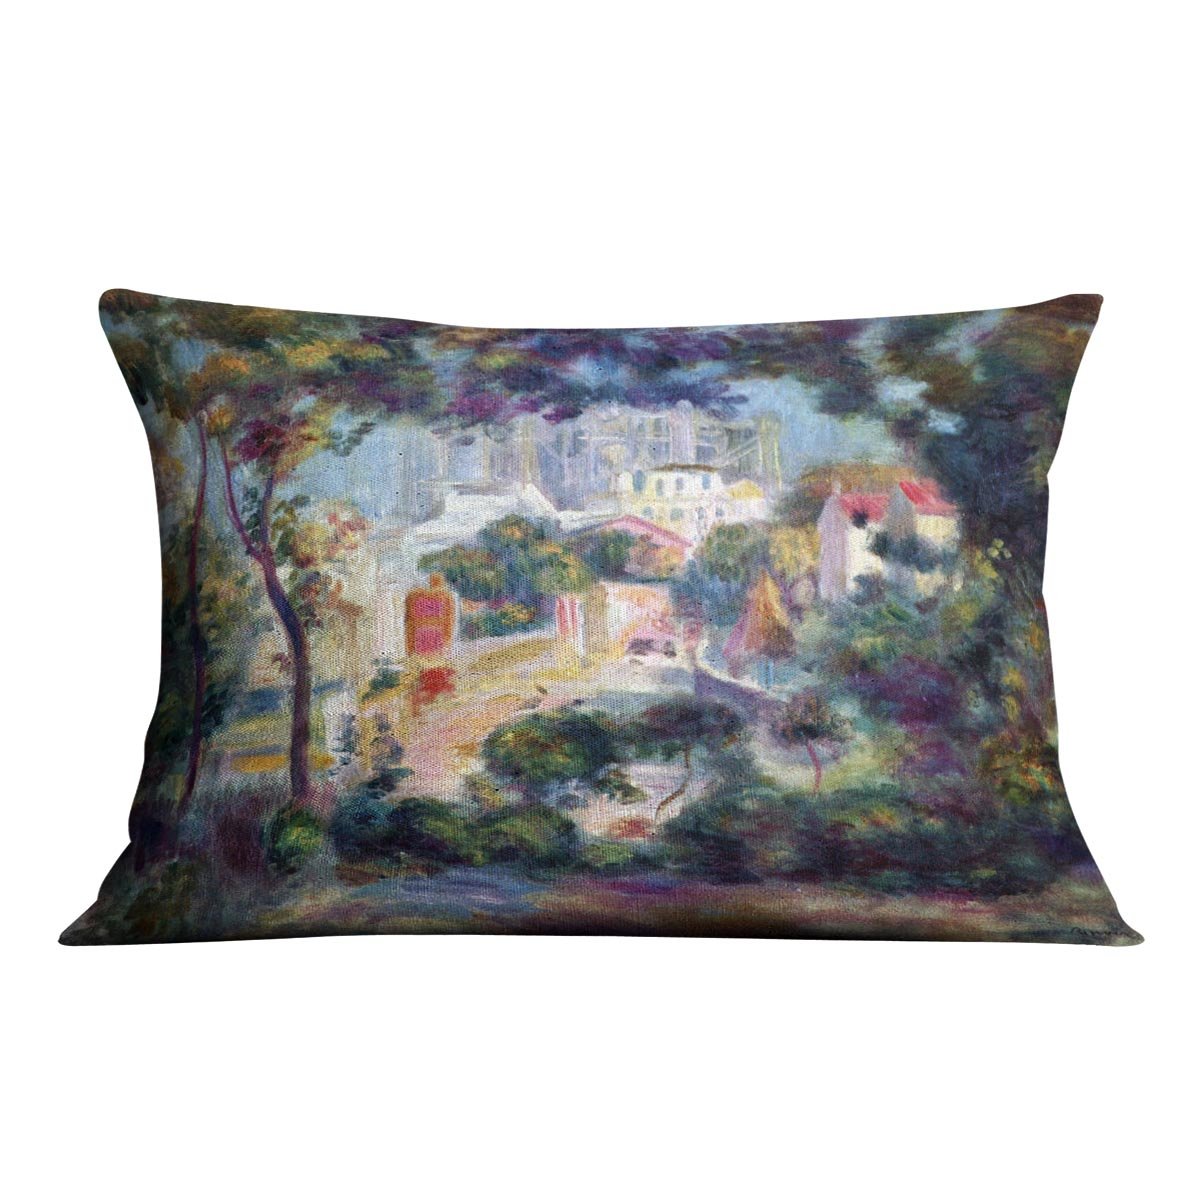 Landscape with a view of the Sacred Heart by Renoir Throw Pillow